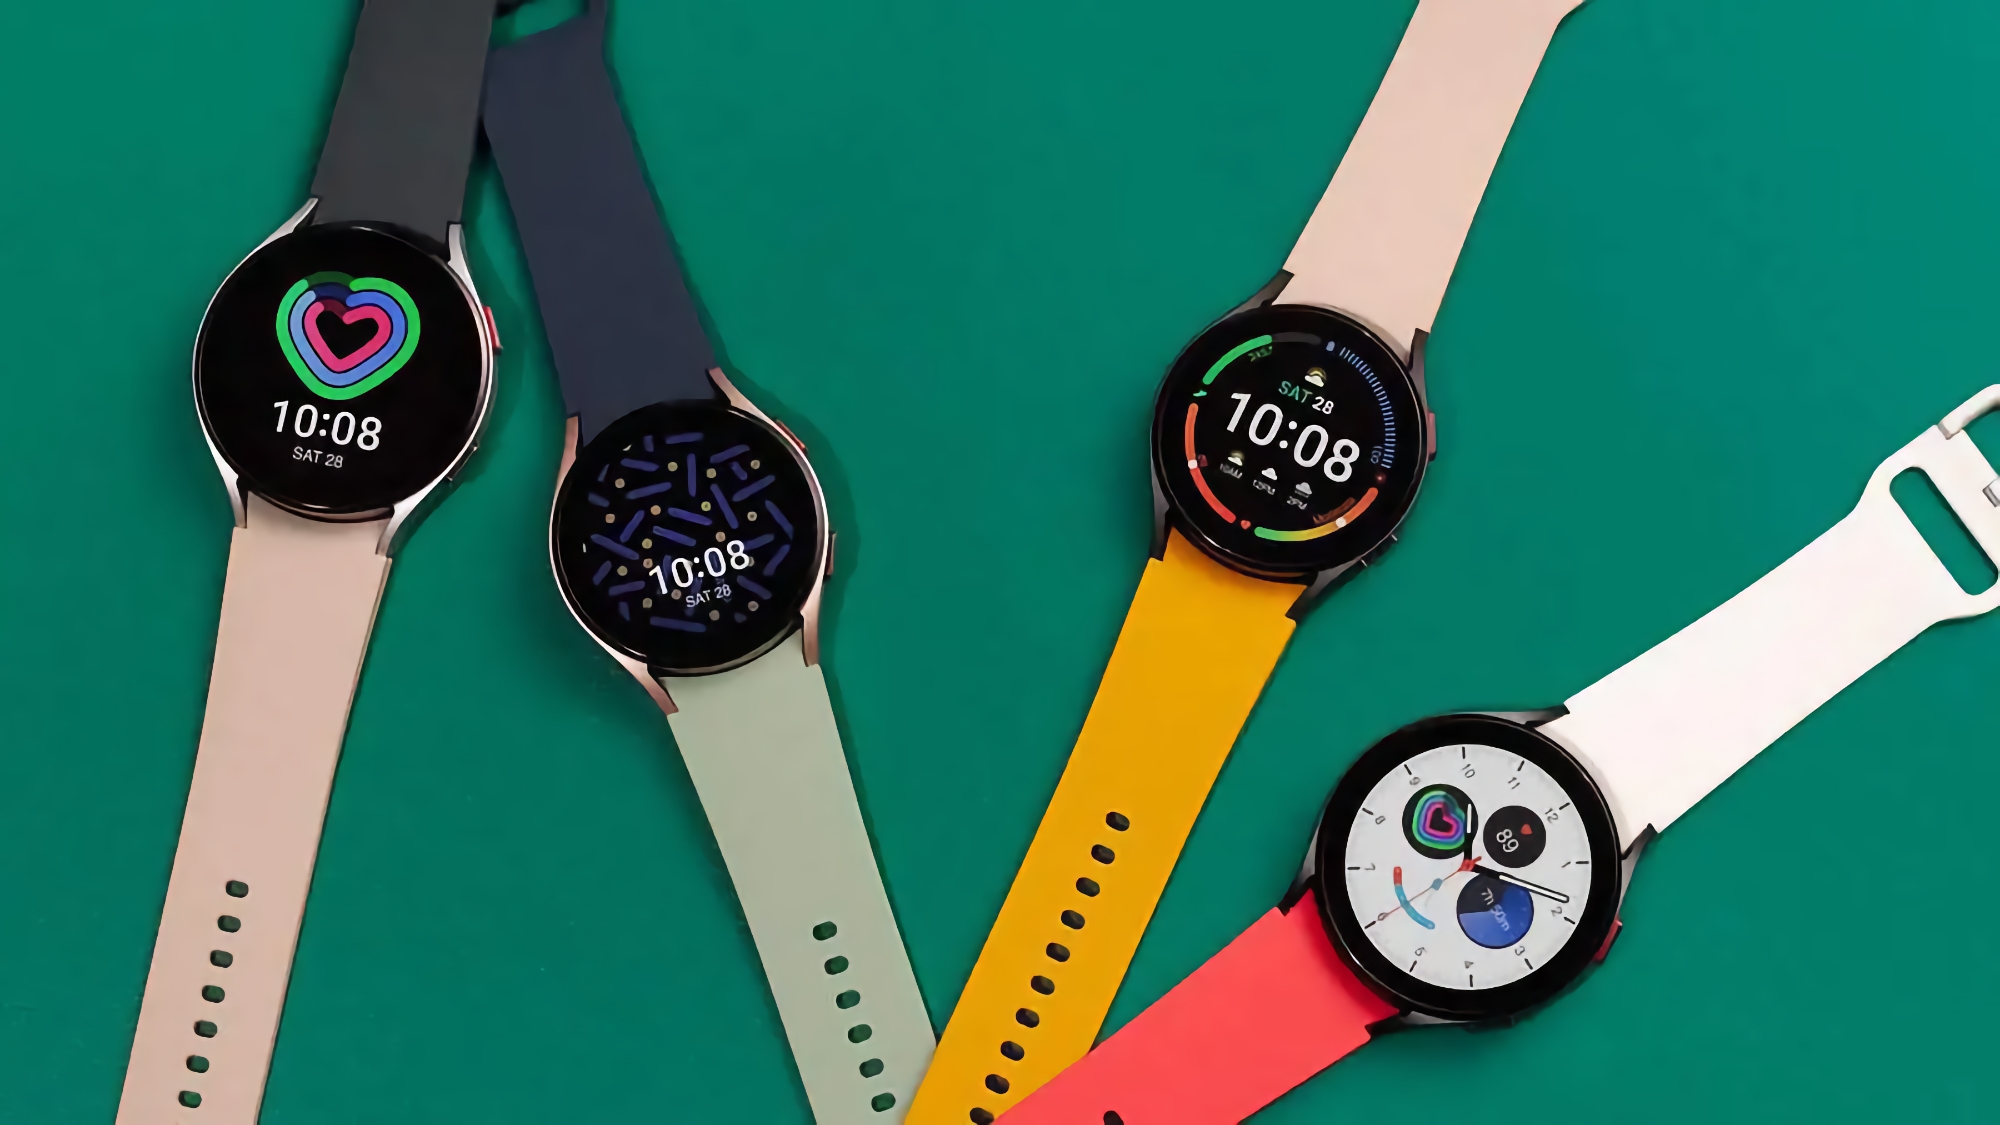 How much will the Samsung Galaxy Watch 5 smart watch cost in Europe